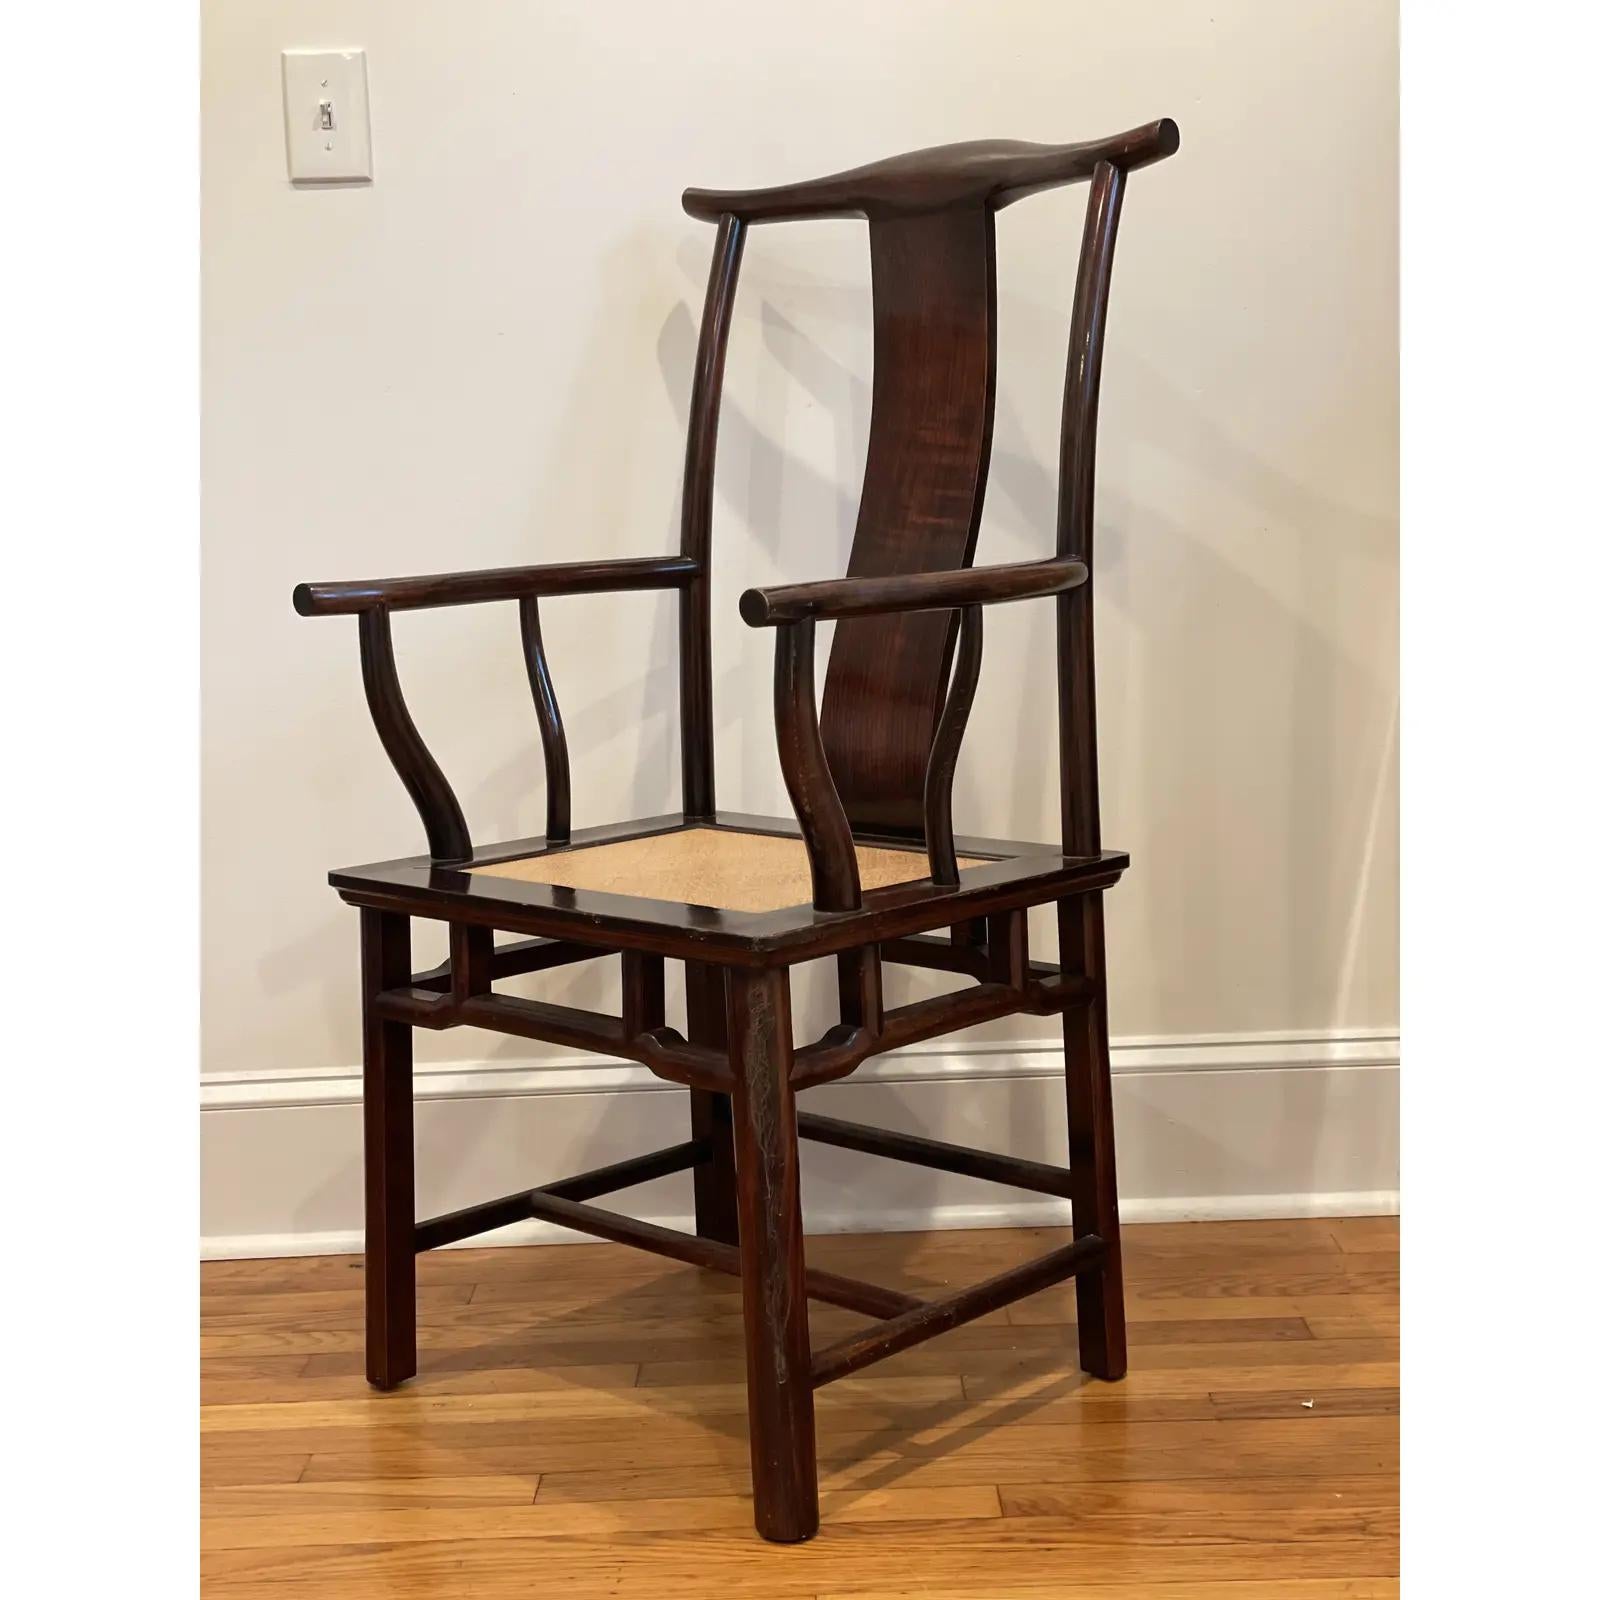 Chinese Yoke back scholar chair. Classic style with cane seat. Wonderful coloring and lines.